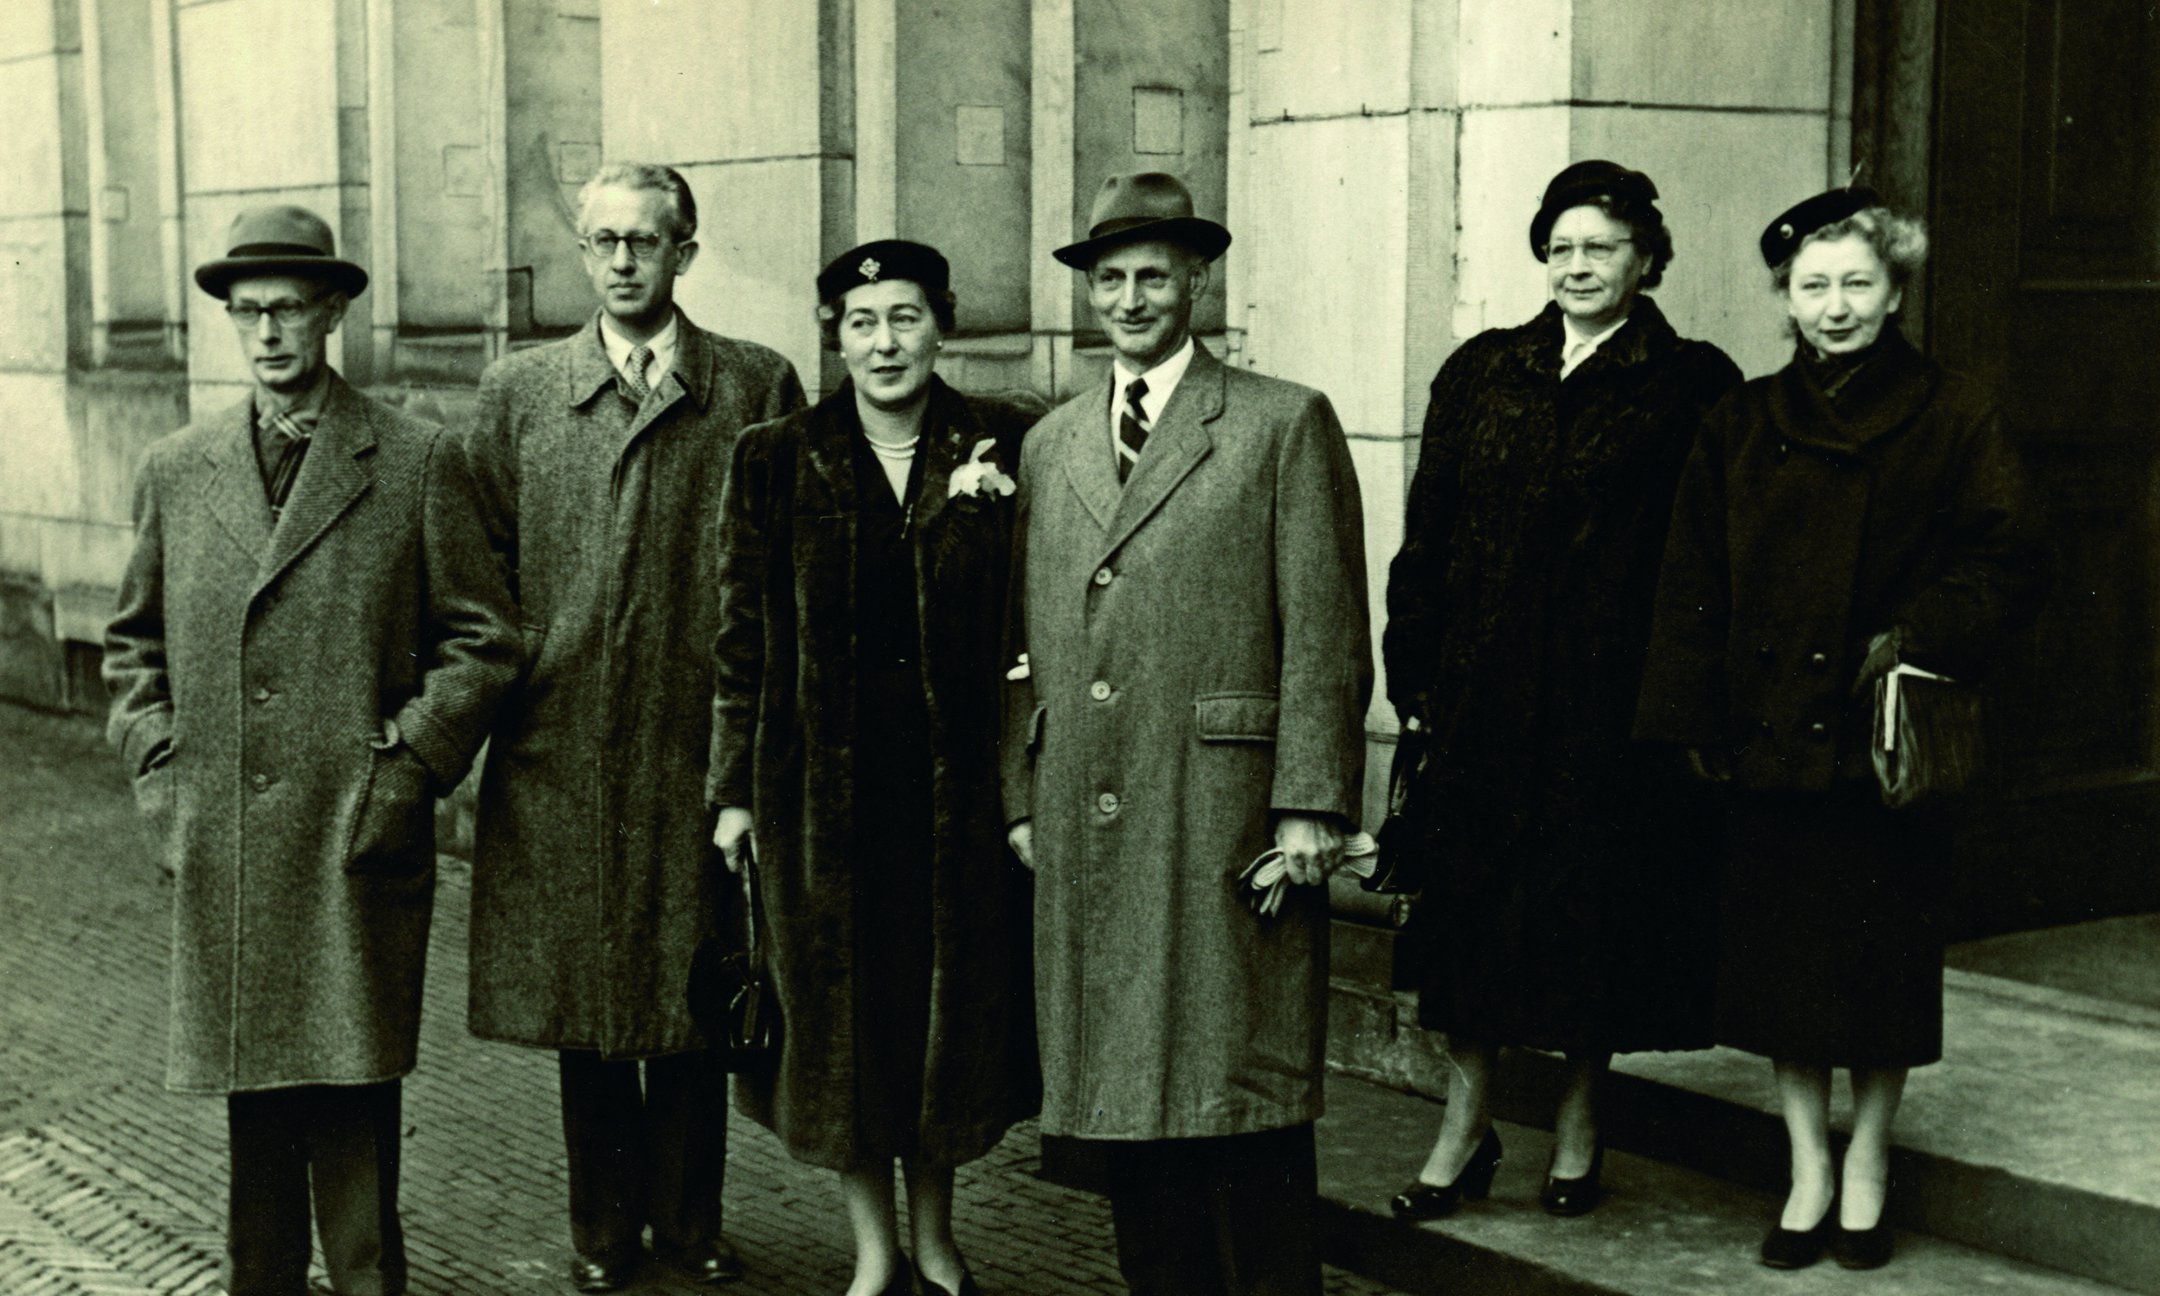 Otto Frank and Fritzi Frank on their wedding day, 10 November 1953. From left to right: Johannes Kleiman, Jan Gies, Fritzi Frank, Otto Frank, Johanna Kleiman, and Miep Gies.